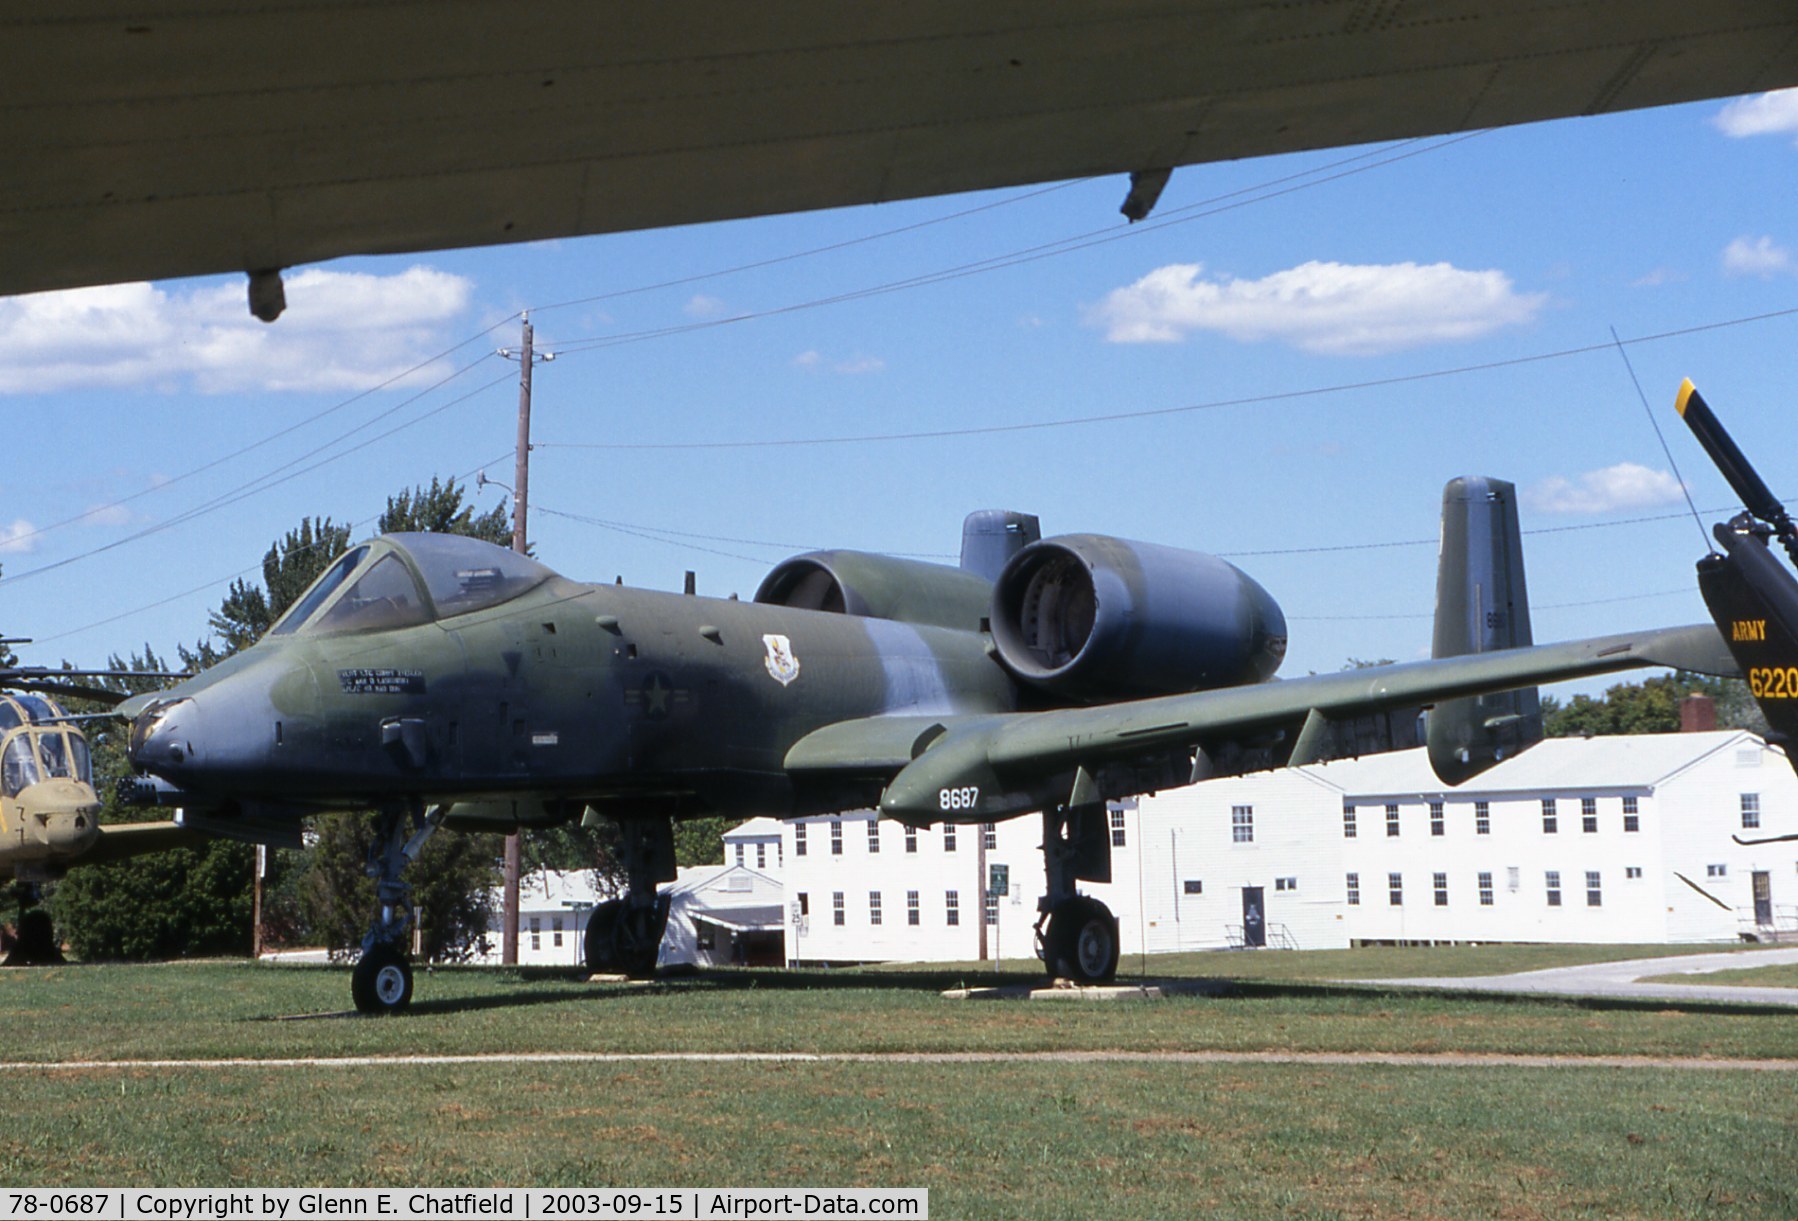 78-0687, 1978 Fairchild Republic A-10A Thunderbolt II C/N A10-0307, A-10A at Ft. Campbell, KY 101st Airborne Div. Museum